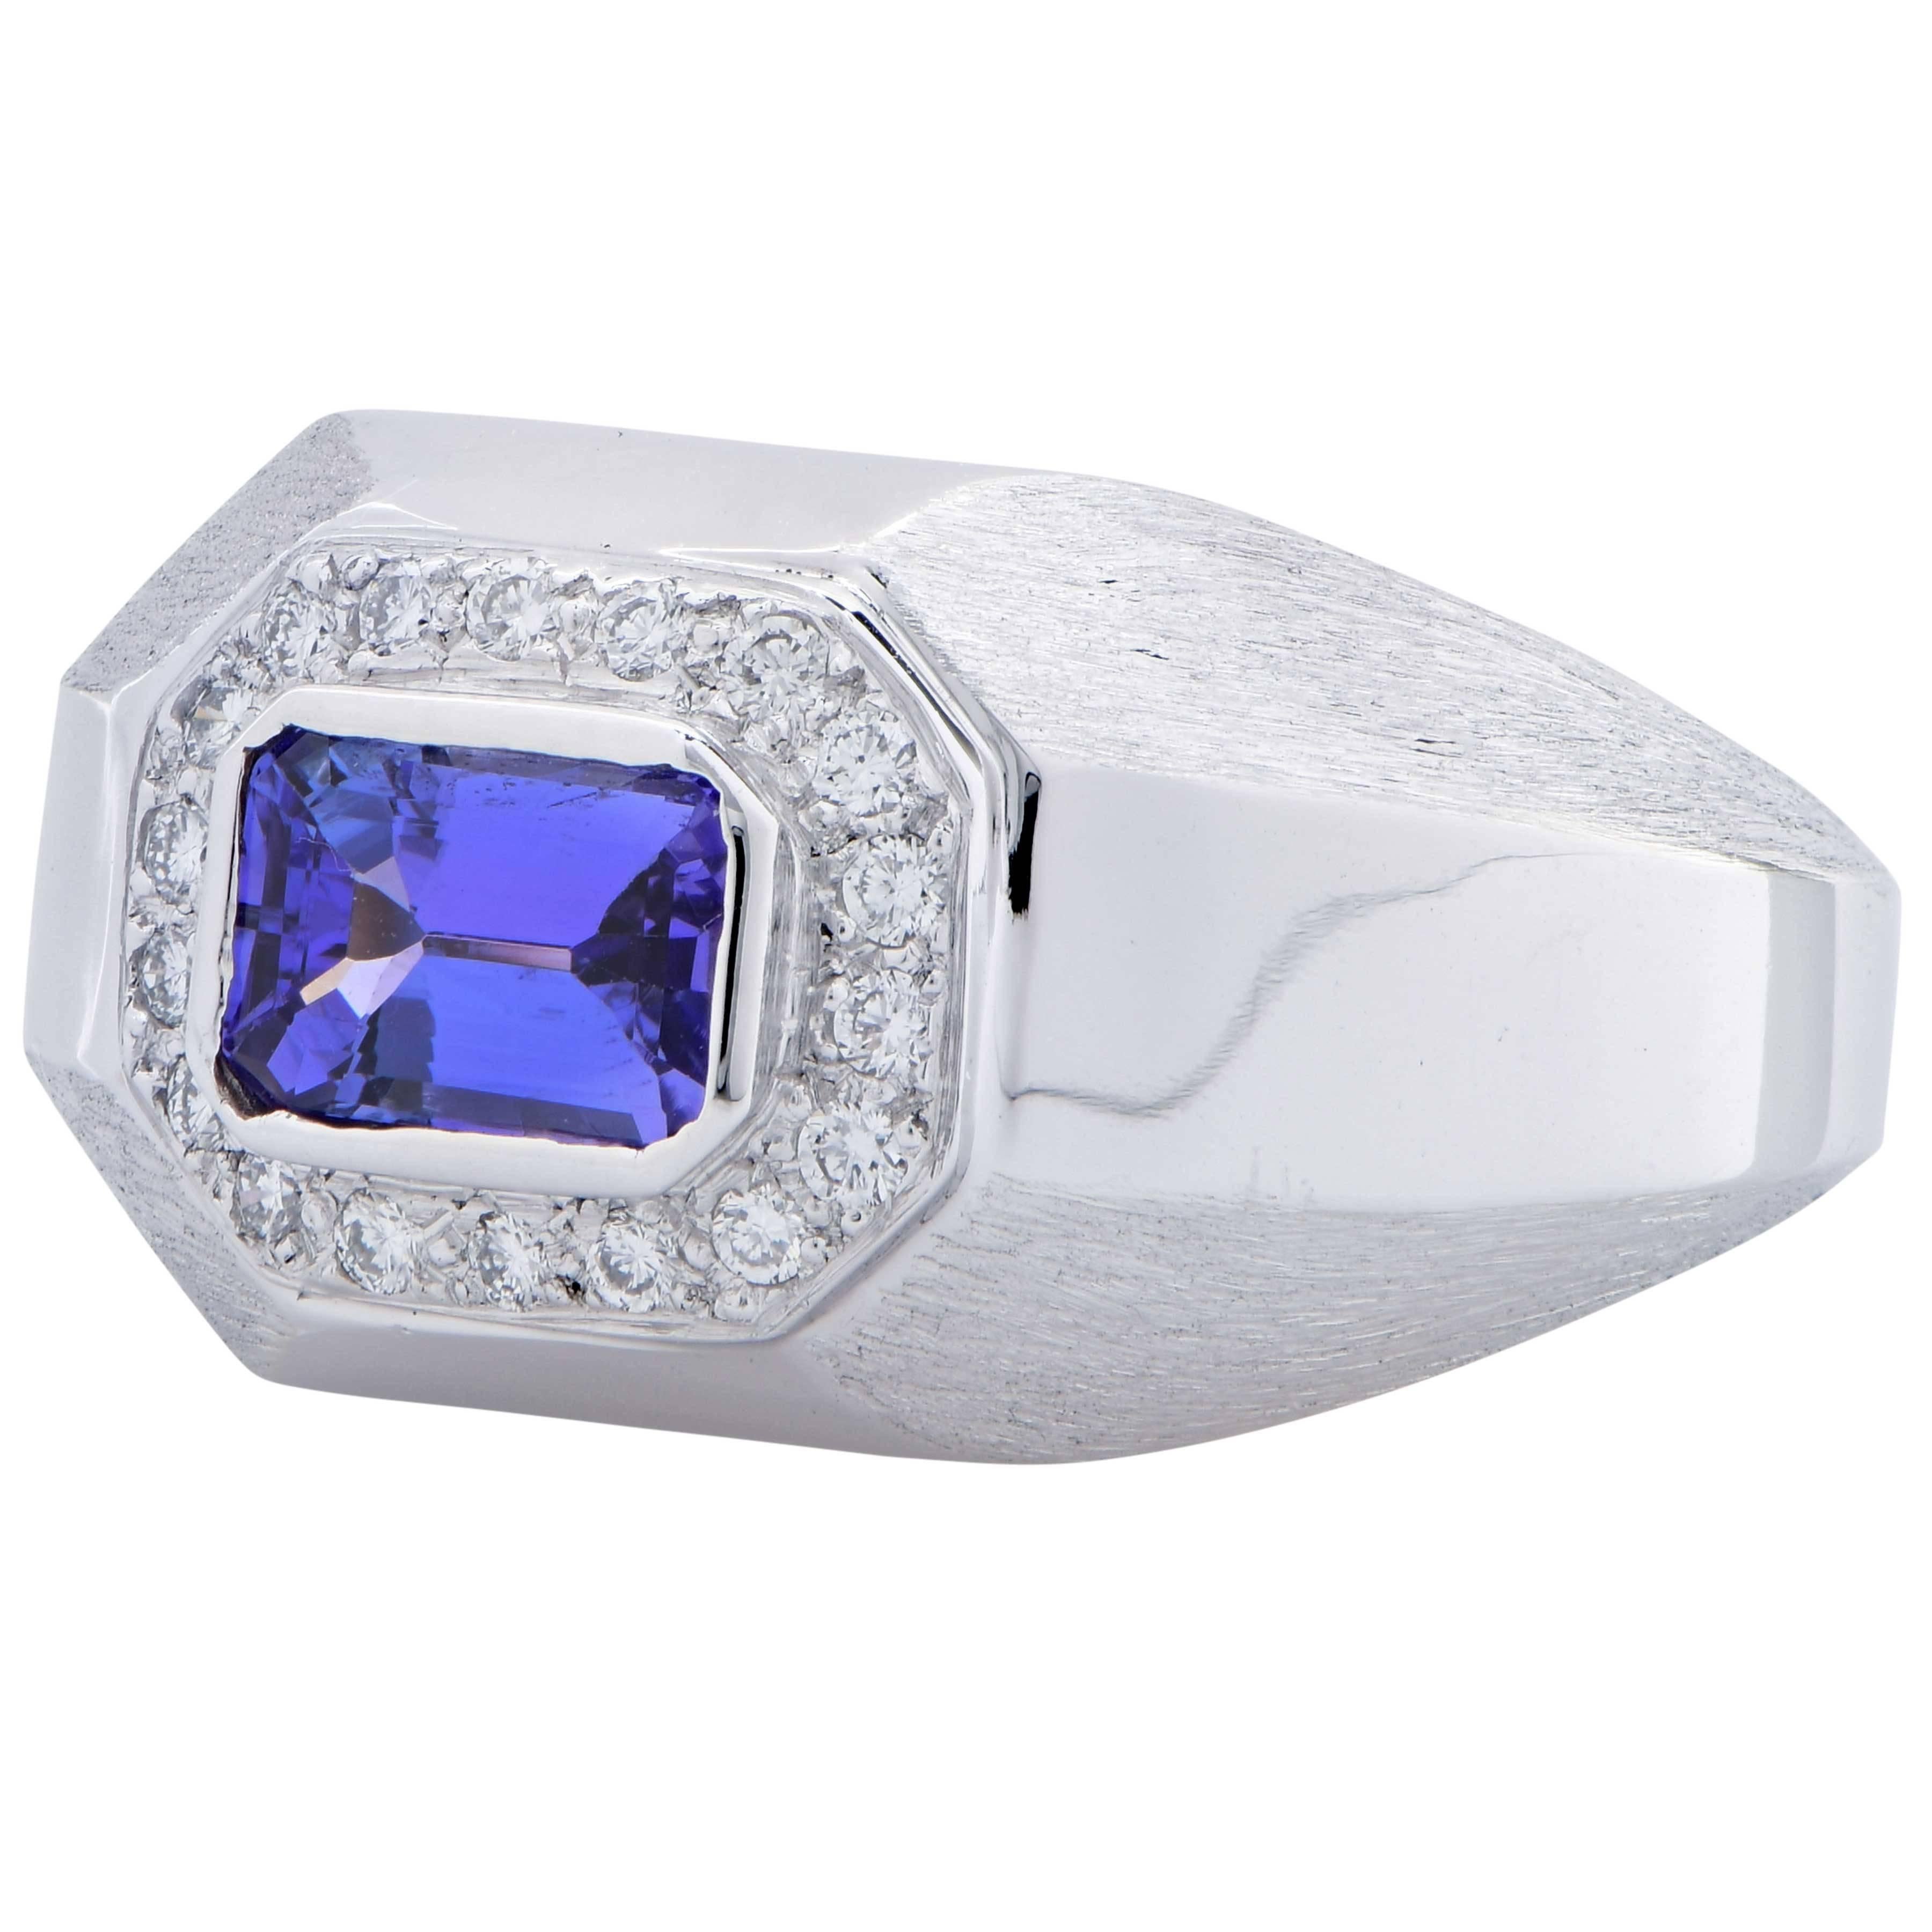 1.15 Carat Tanzanite and Diamond 18 Karat White Gold Ring In Excellent Condition For Sale In Bay Harbor Islands, FL